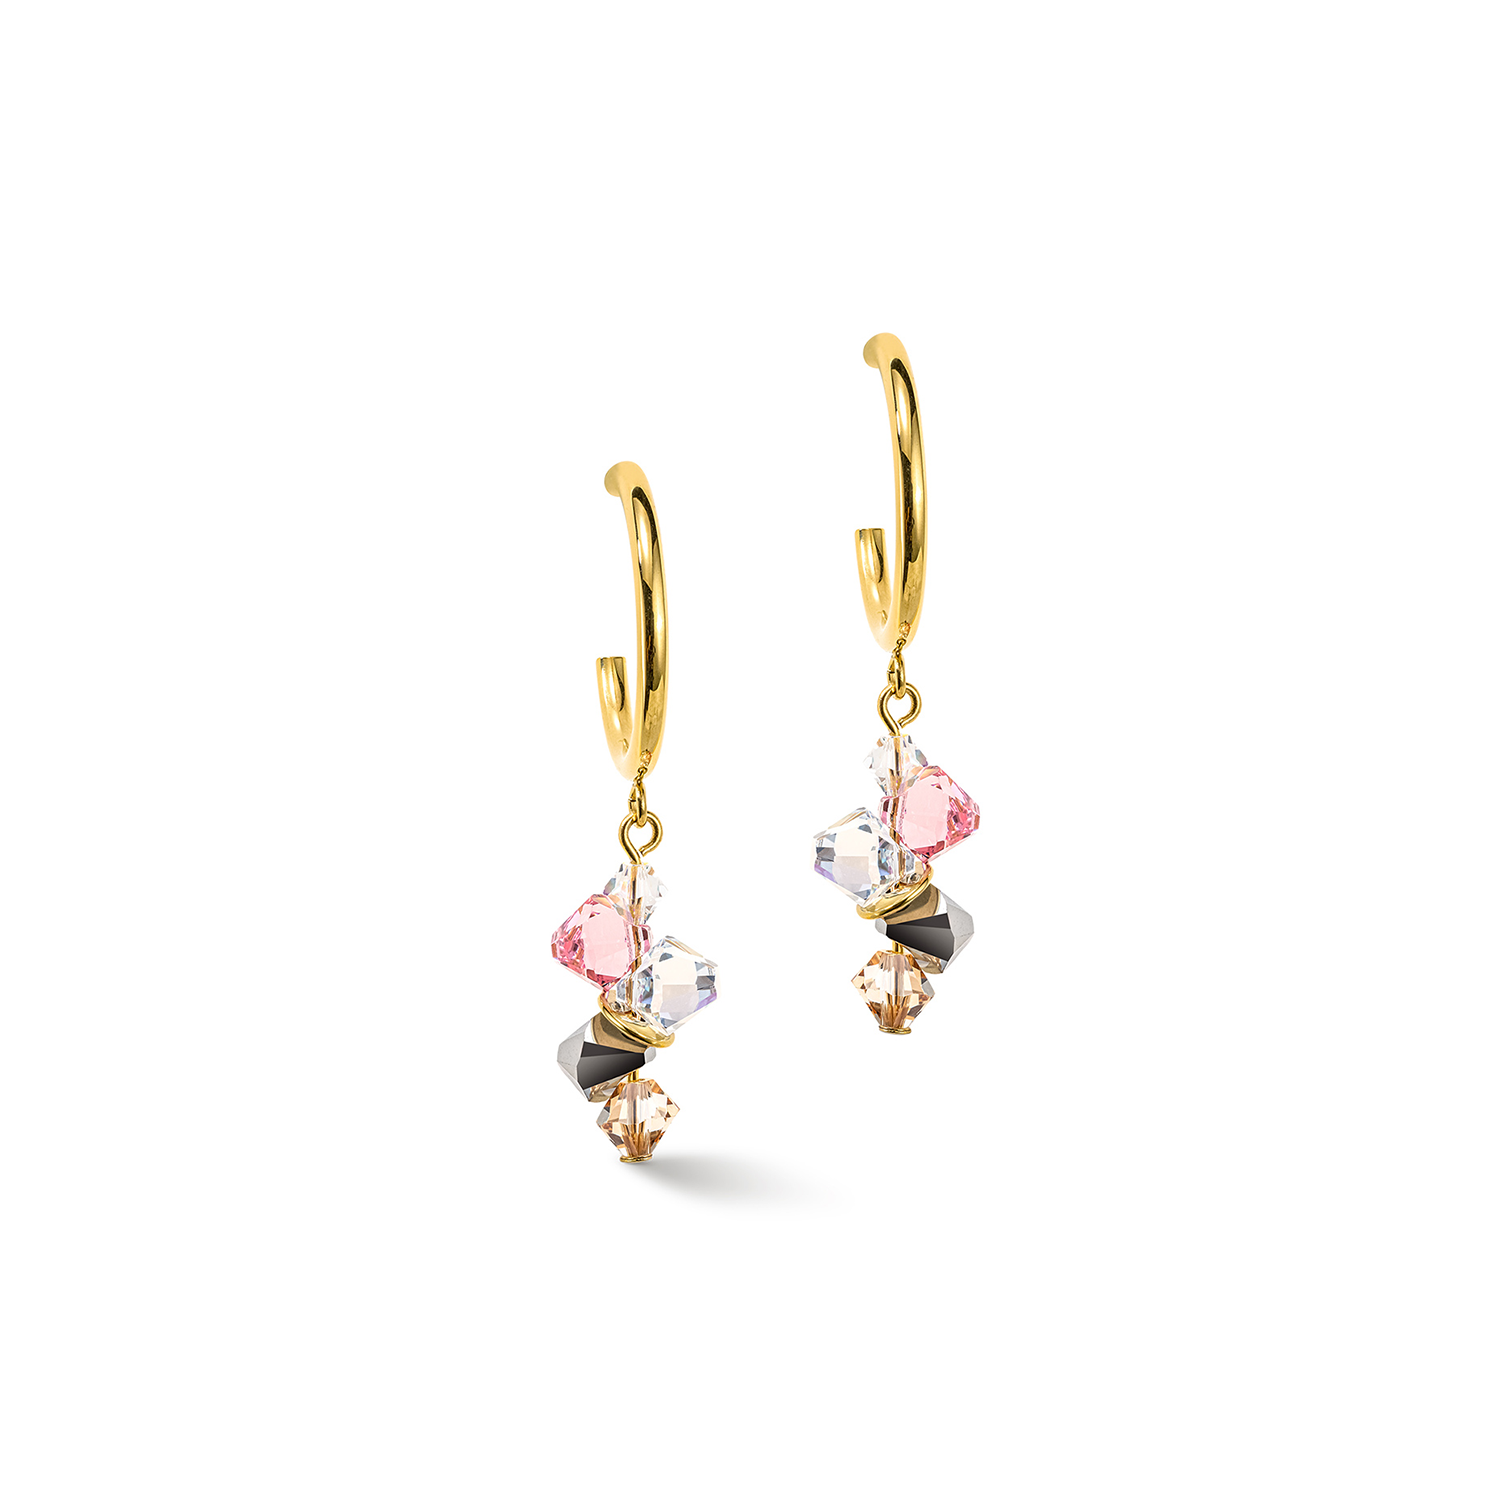 Radiating Gold, Silver & Shimmering Pink Earrings 4639/21_1920